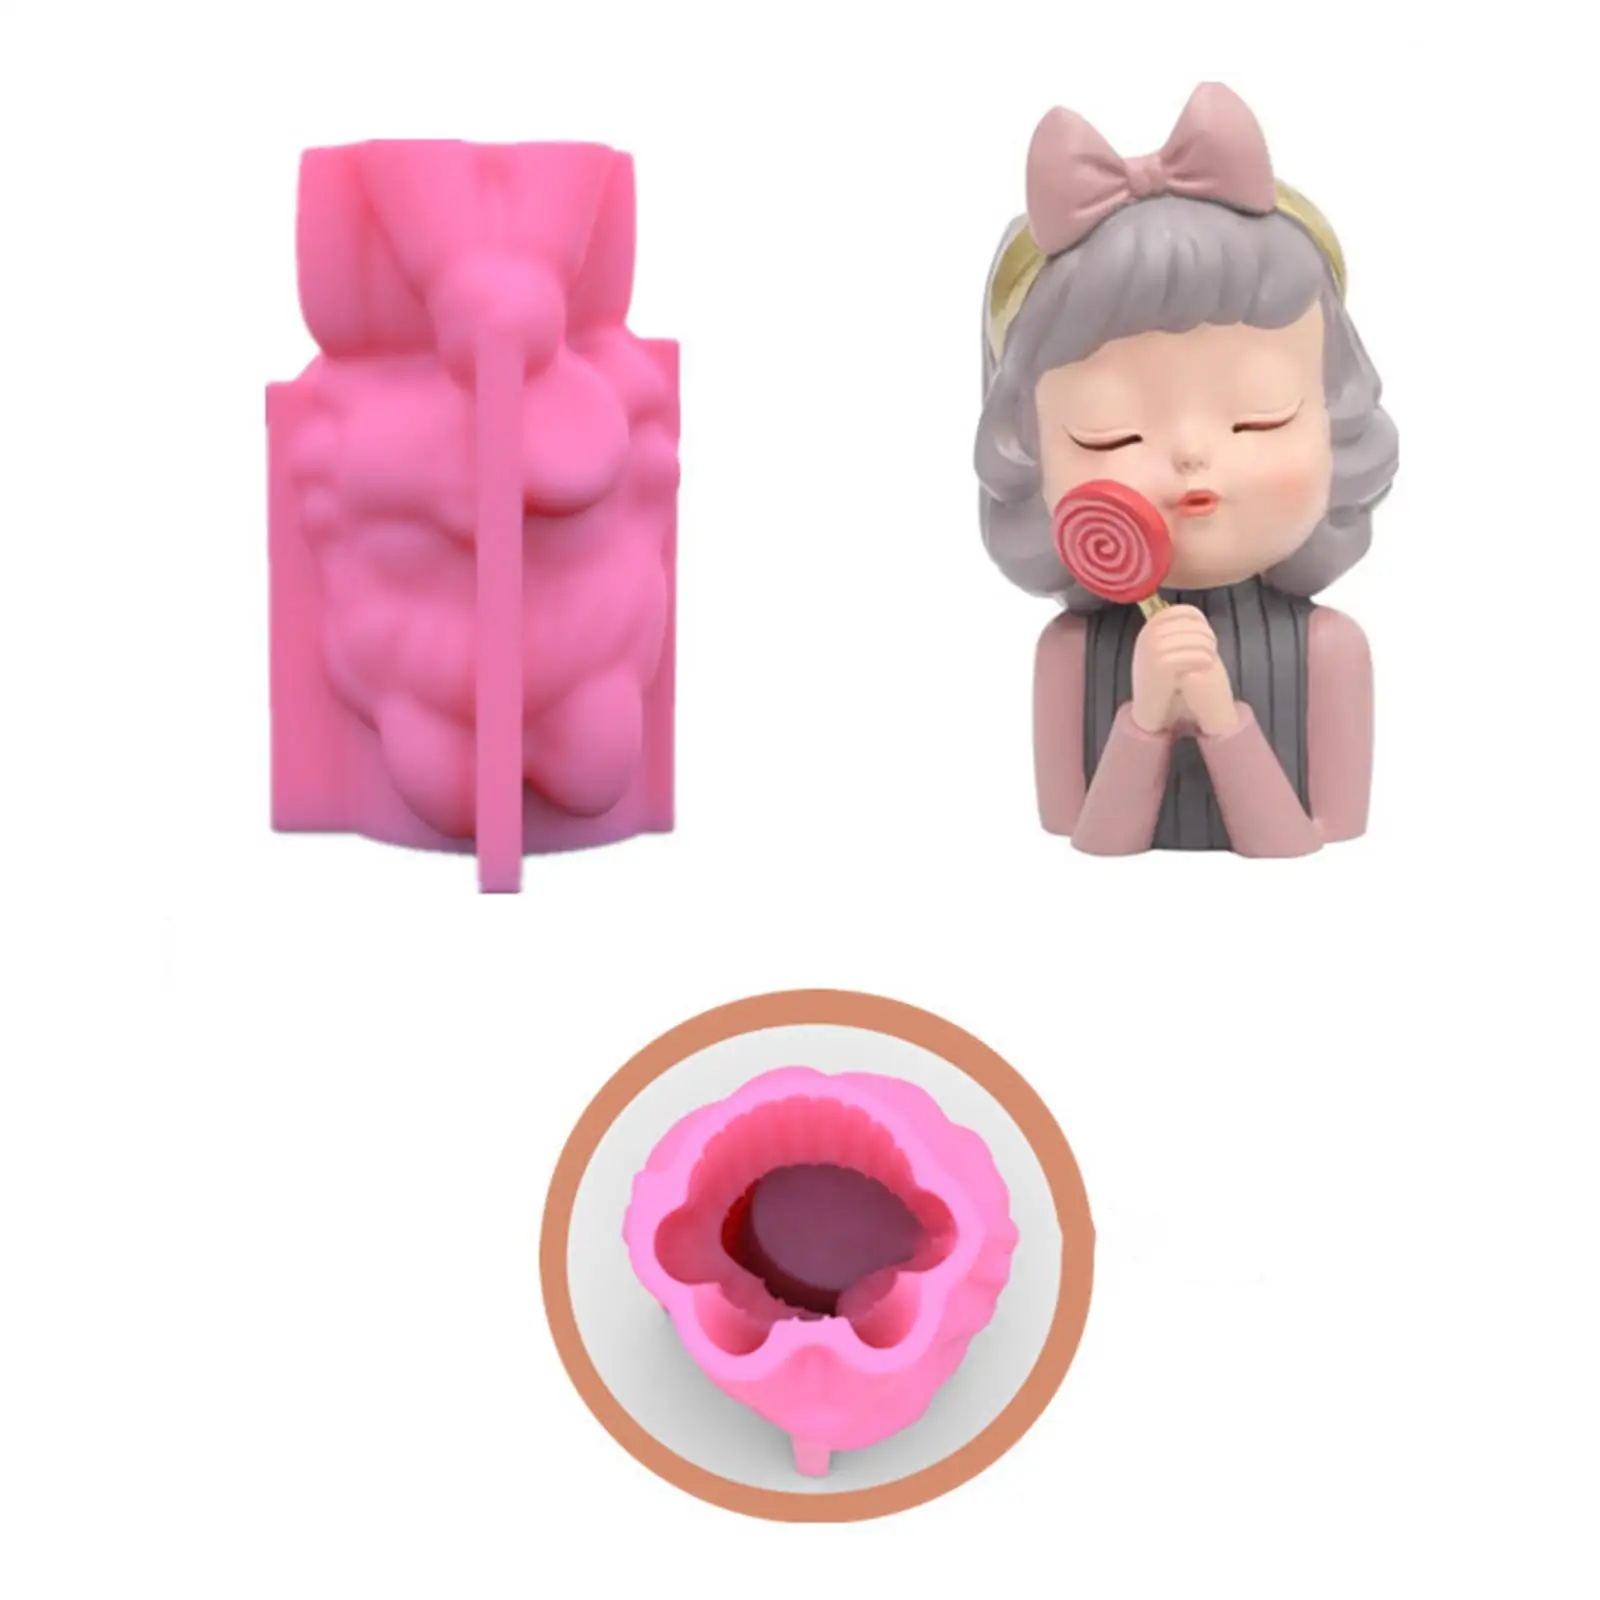 3D Baking Decor Cake Decorating Accessories Craft Concrete Planter Fondant DIY Silicone Mold Silica Gel Mould Resin for Home